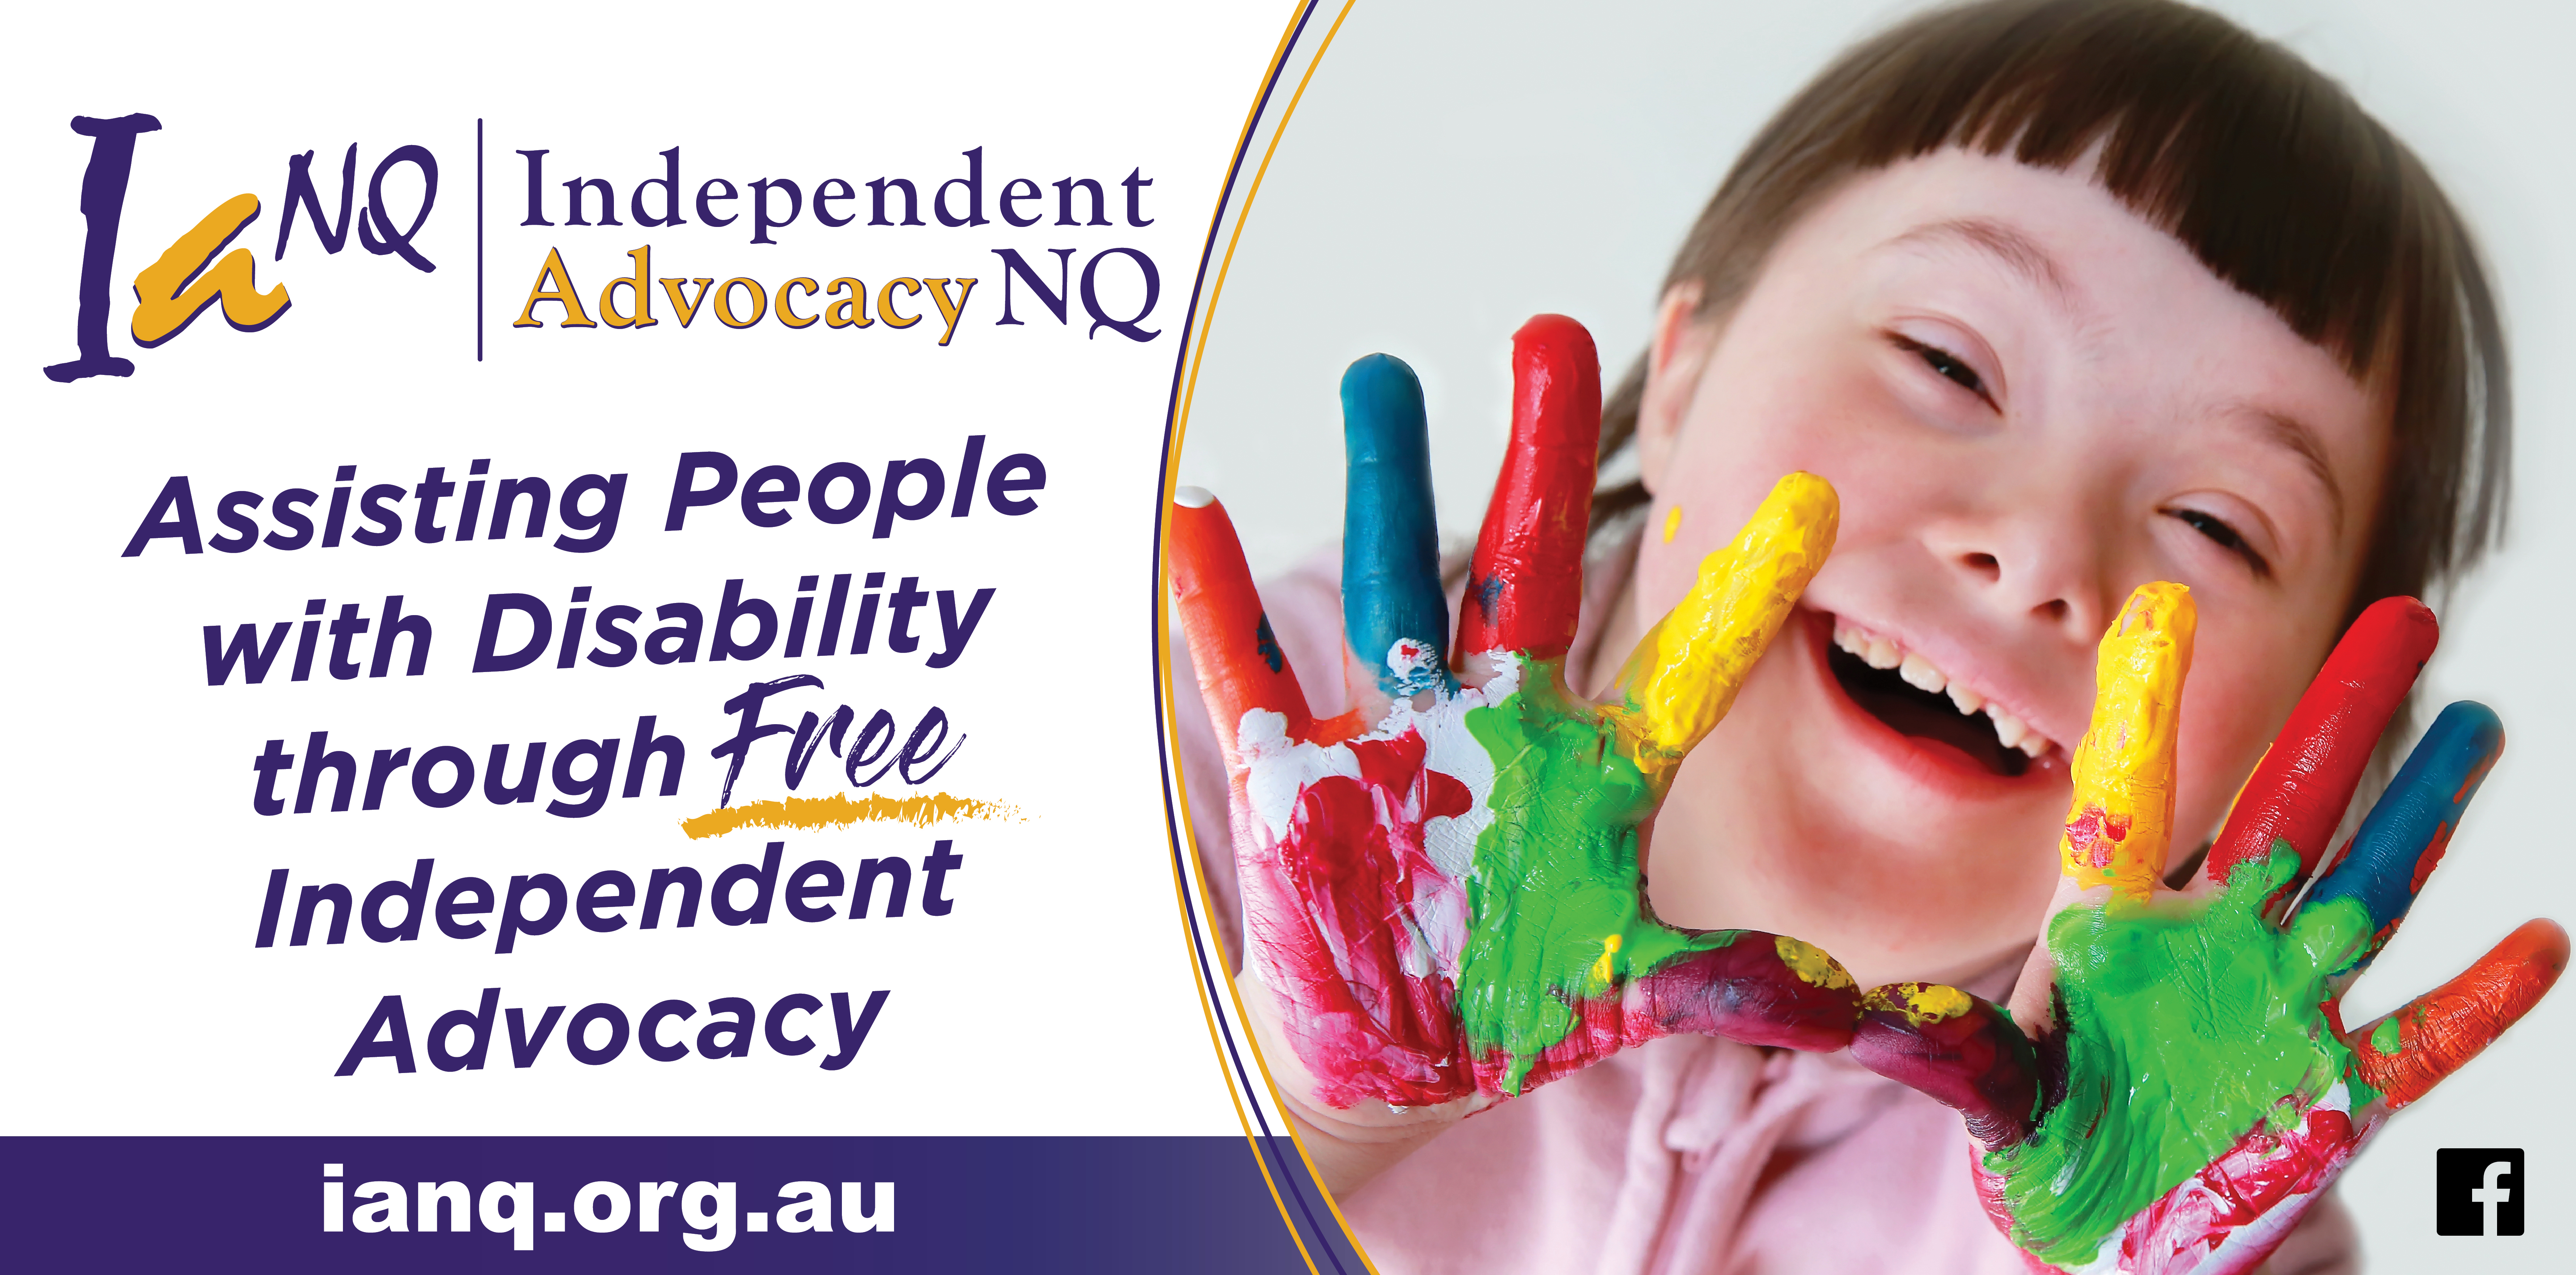 Billboards funded through our various funding partners across Federal and Queensland Government Departments